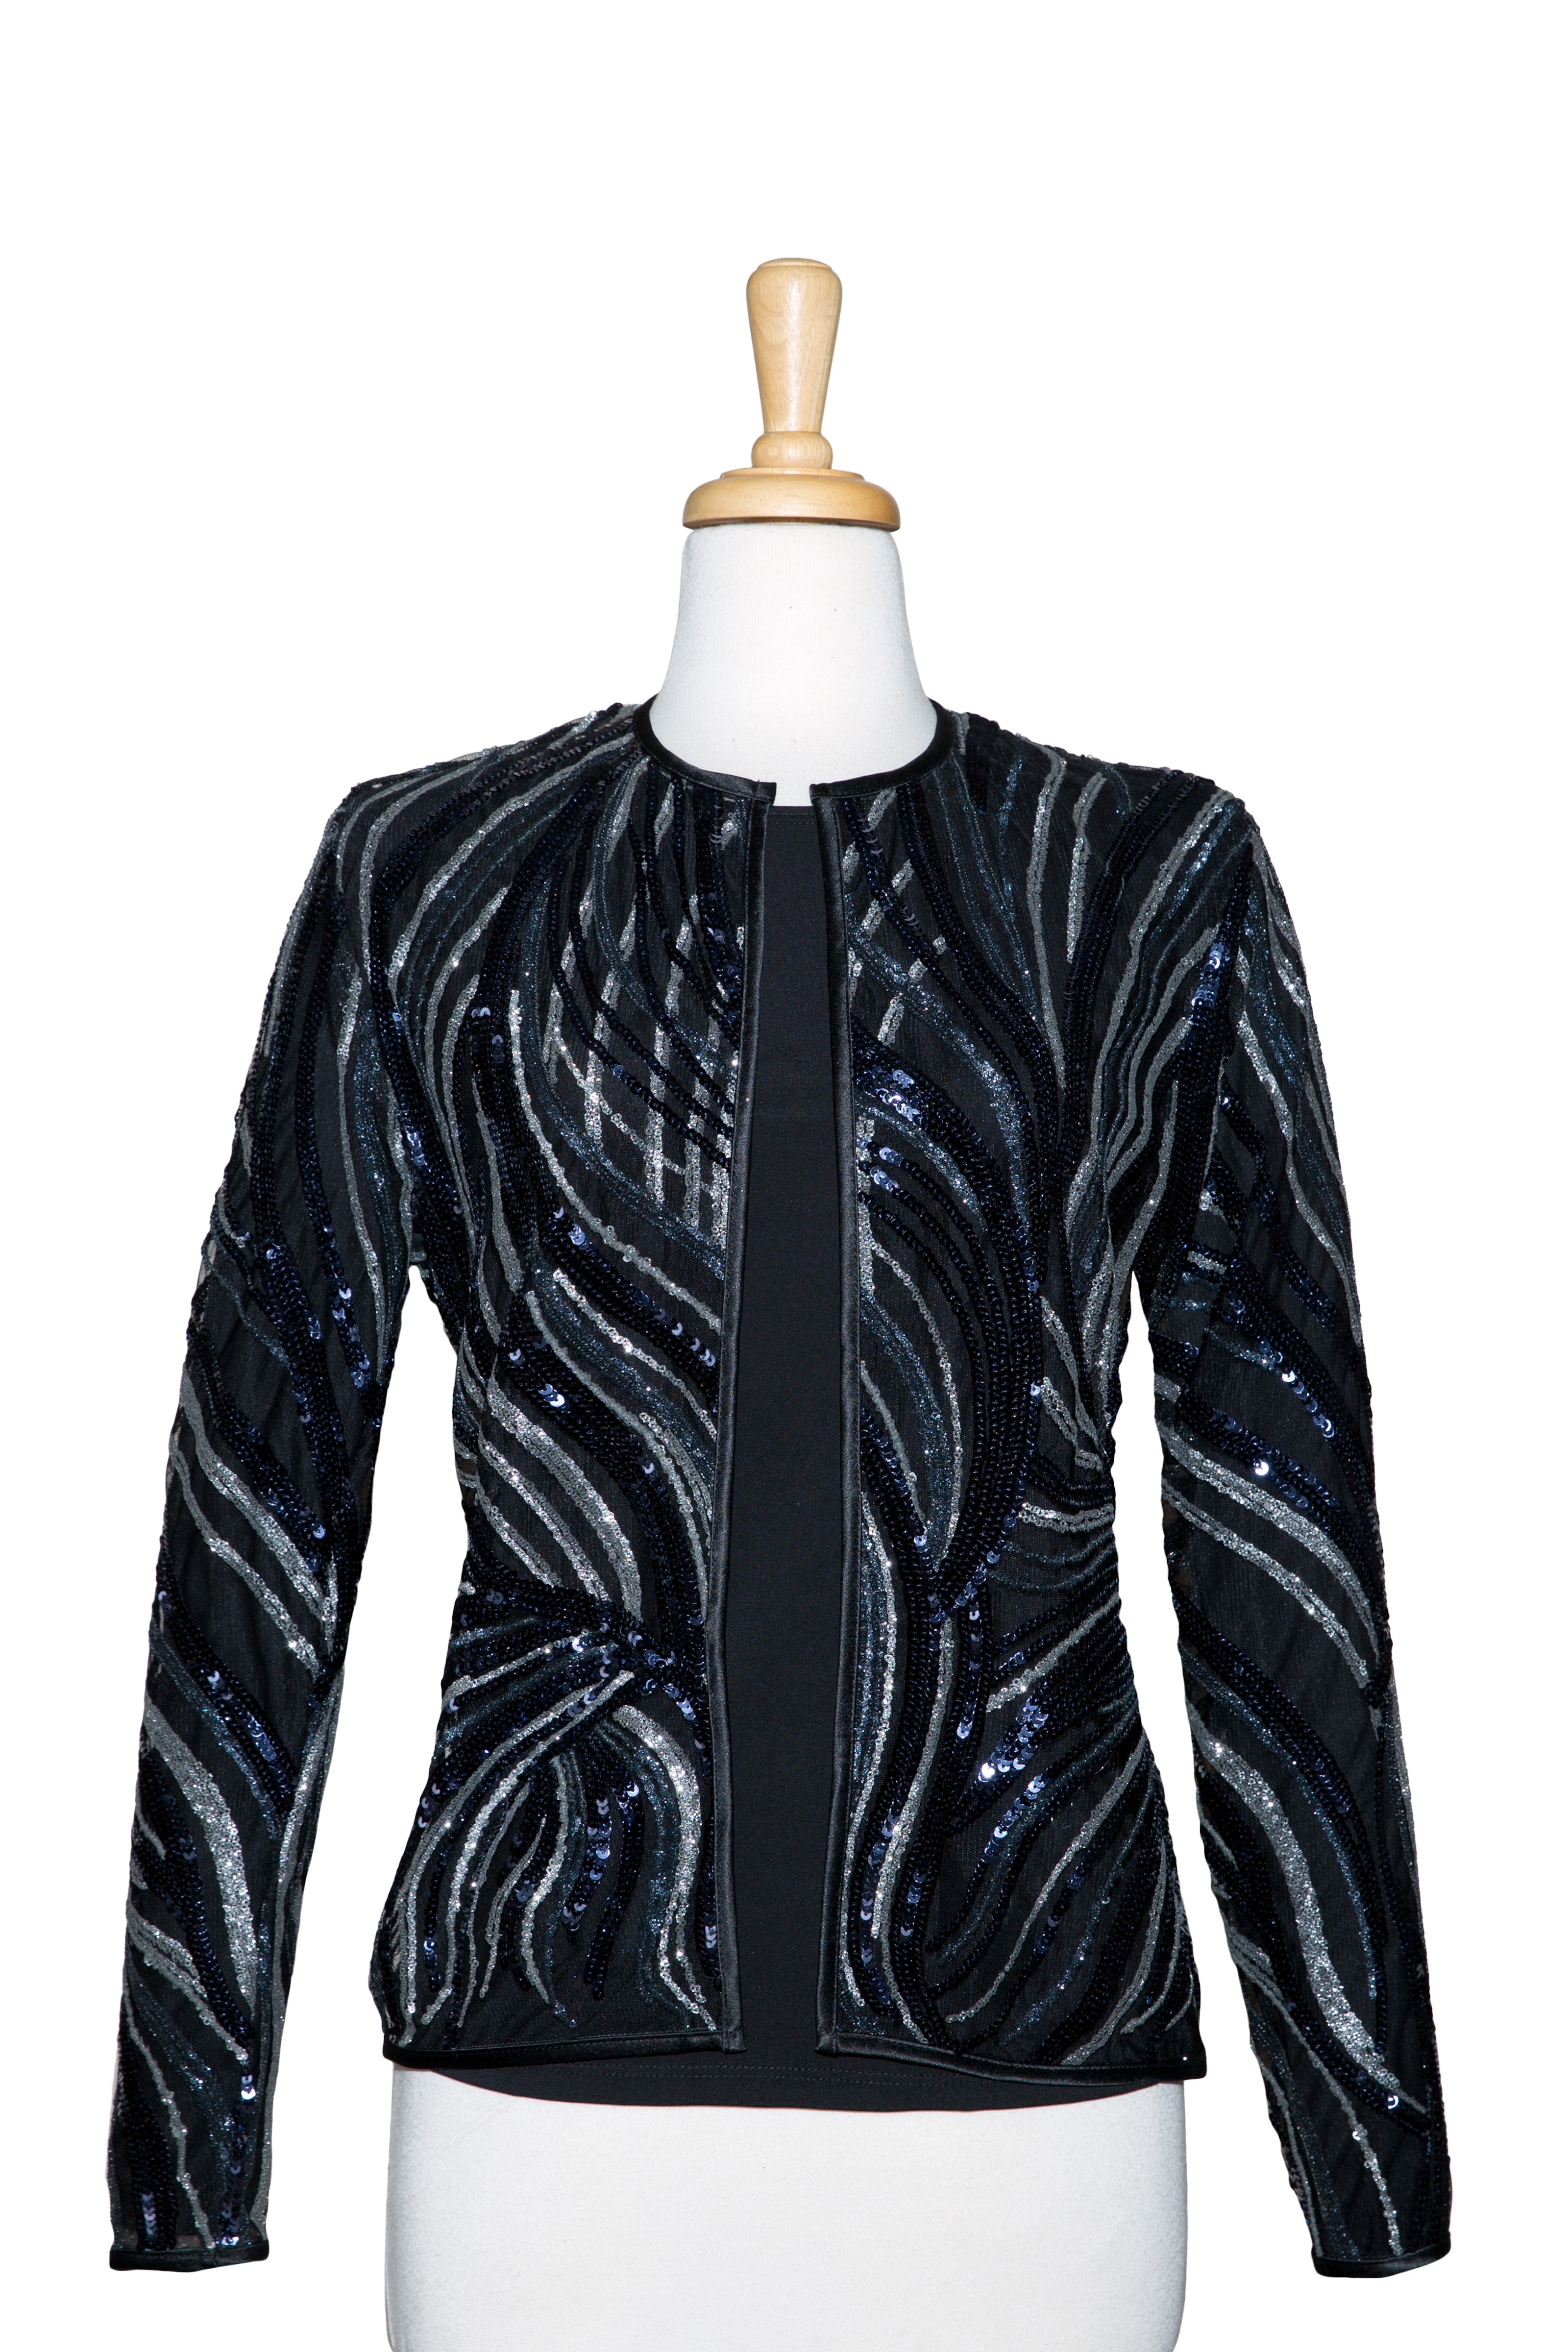 Two Piece Navy, Silver, and Black Sequins Lace Jacket With Black Long Sleeve Top